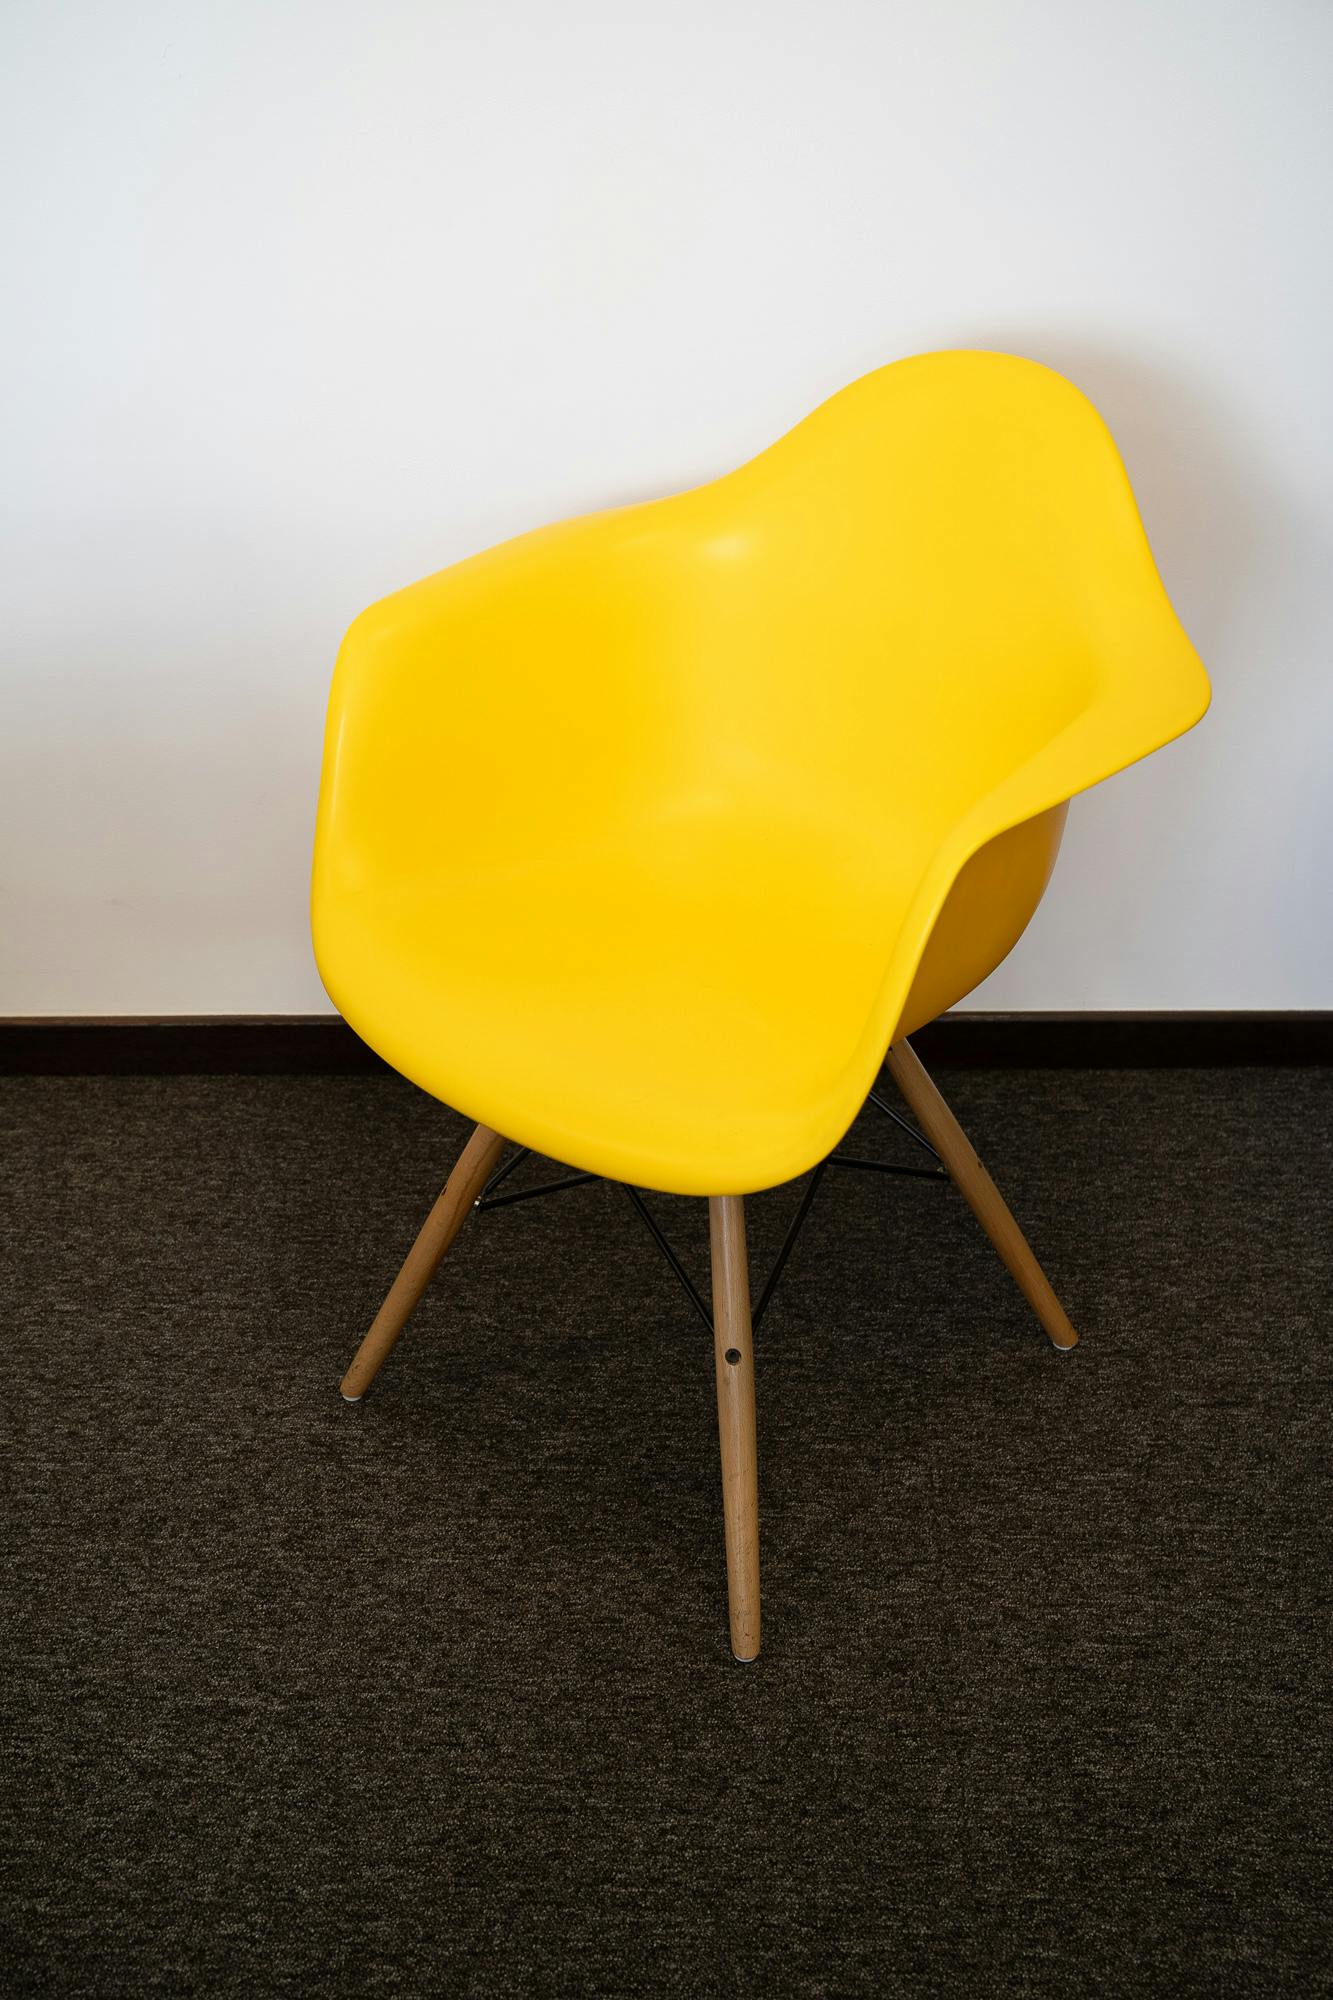 Yellow chair - Second hand quality "Chairs" - Relieve Furniture - 2